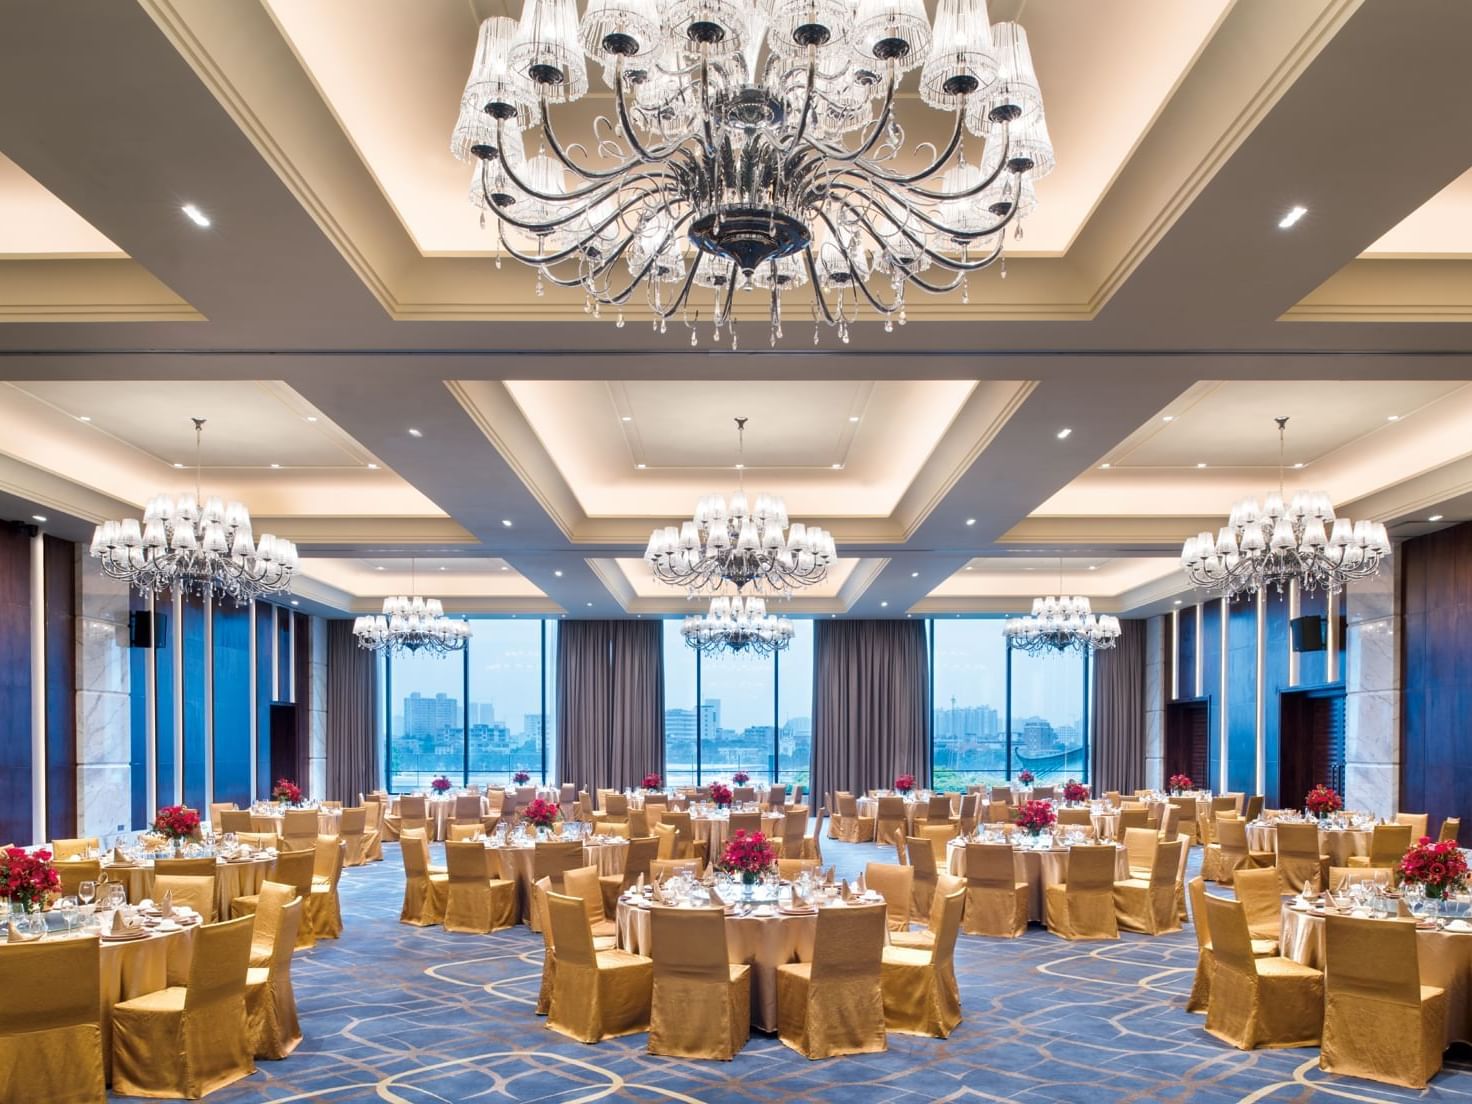 Banquet tables arranged in Grand Ballroom at White Swan Hotel